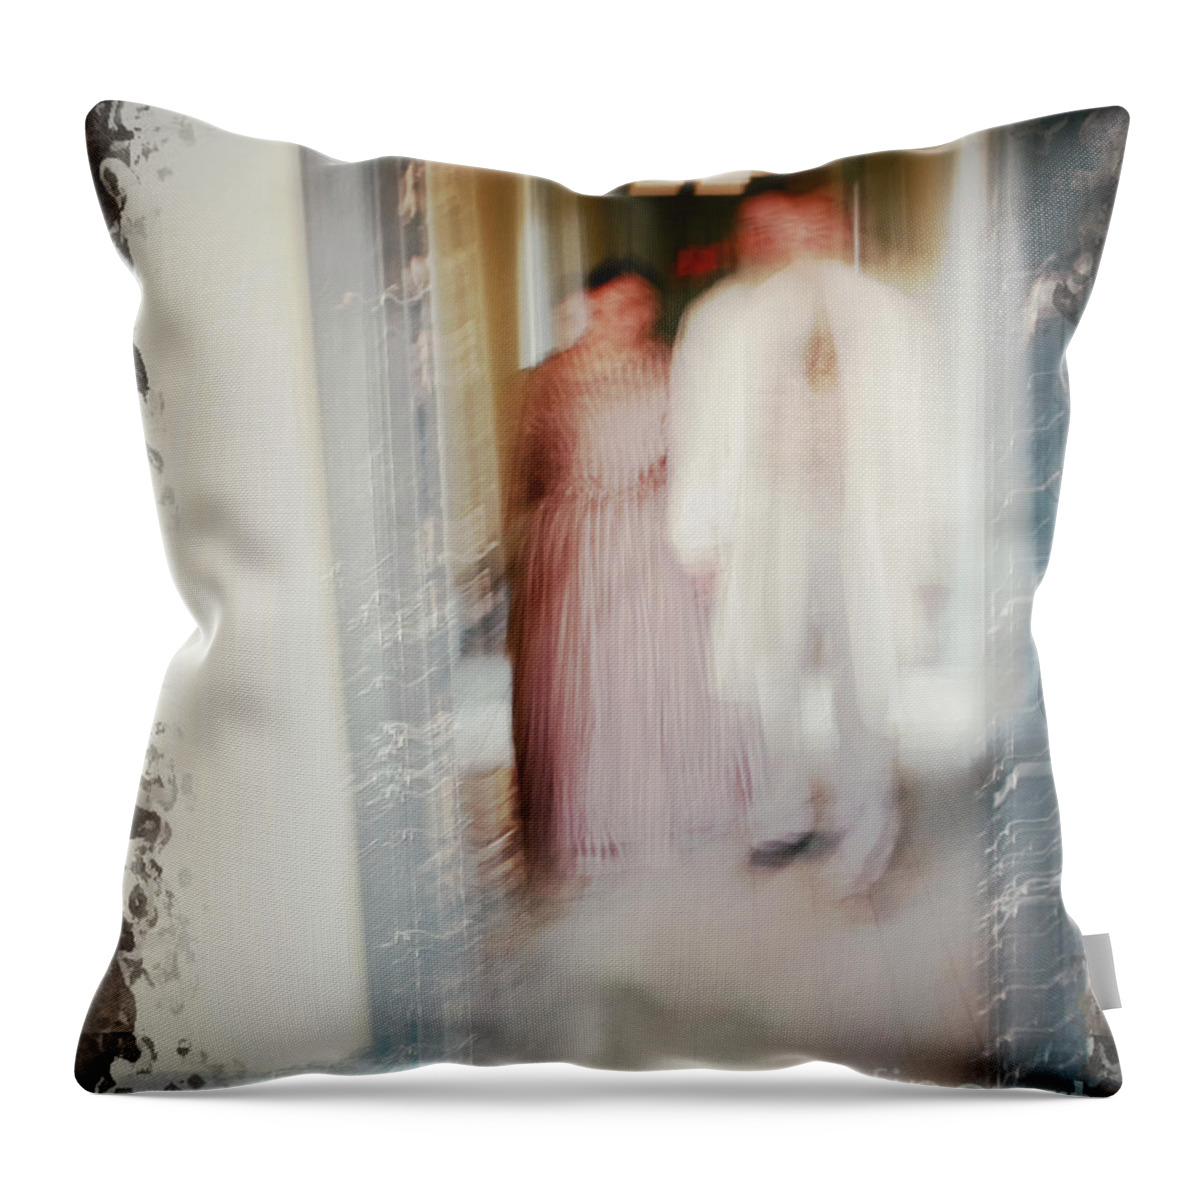 Ghostly Throw Pillow featuring the photograph Old Spirits Rise by Kae Cheatham